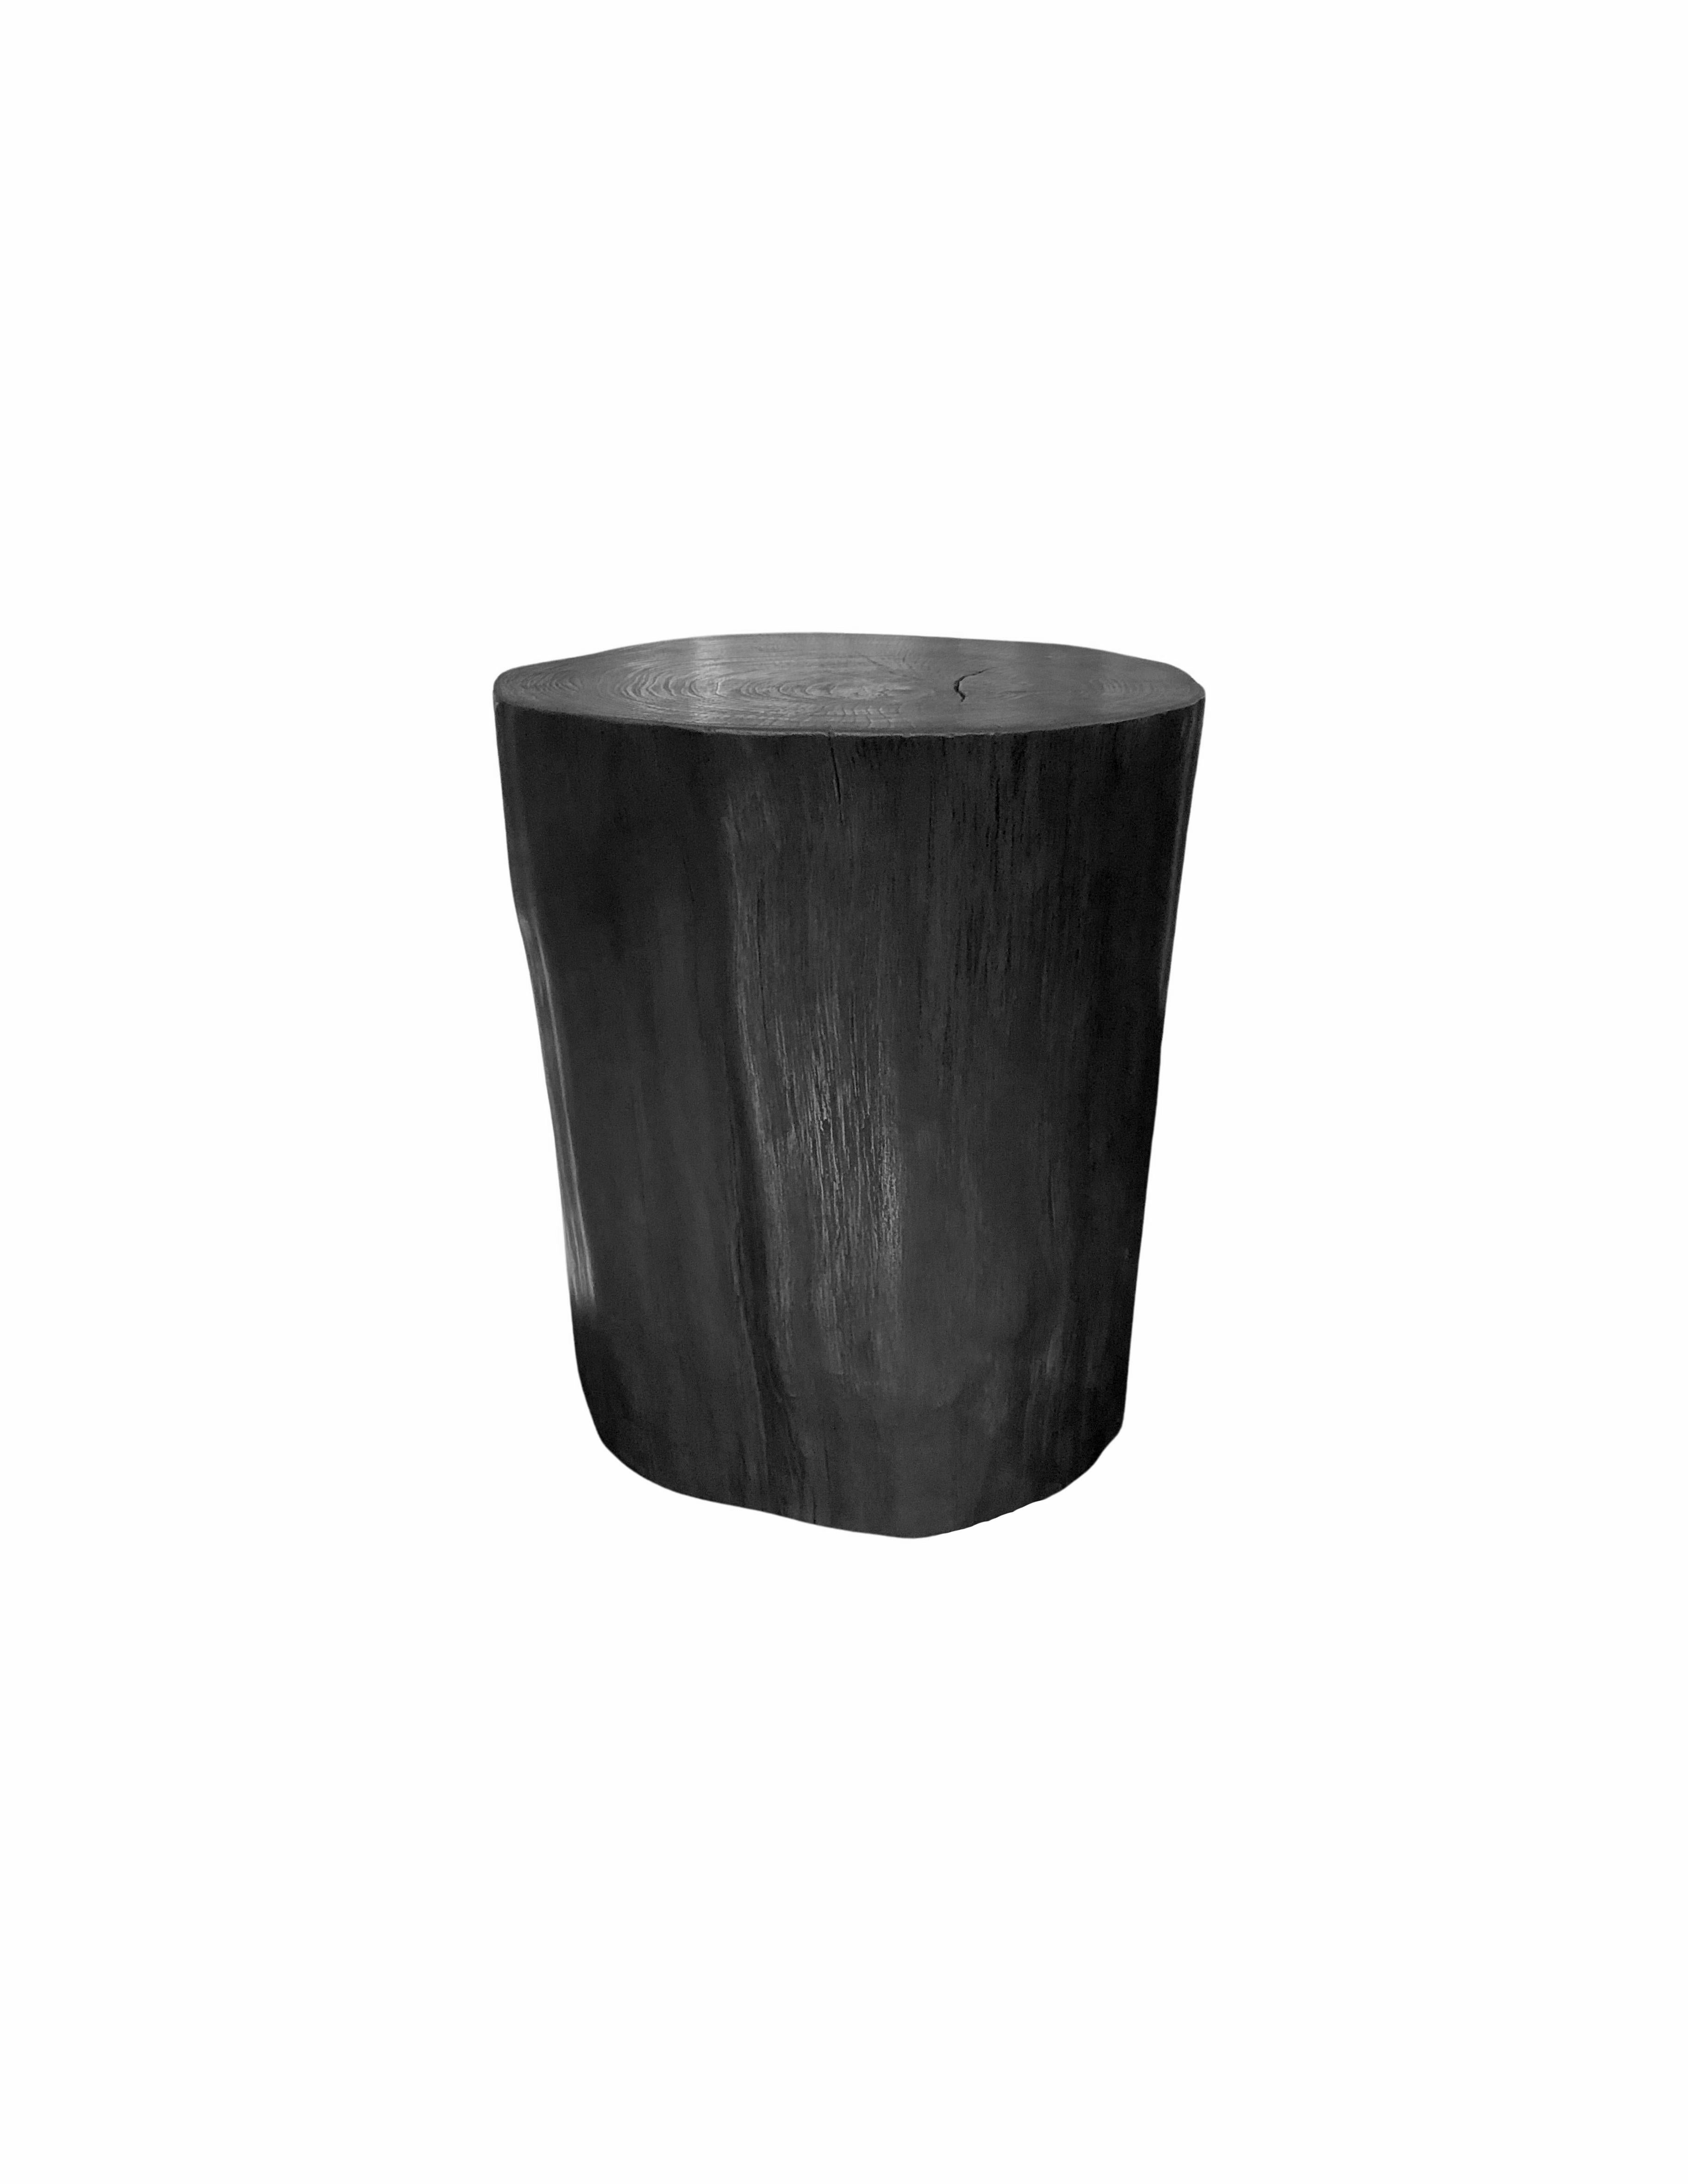 A wonderfully organic round side table. Its neutral pigment and subtle wood texture makes it perfect for any space. This table was crafted from a solid trunk of mango wood. To achieve its pigment the wood was burnt numerous times and then finished